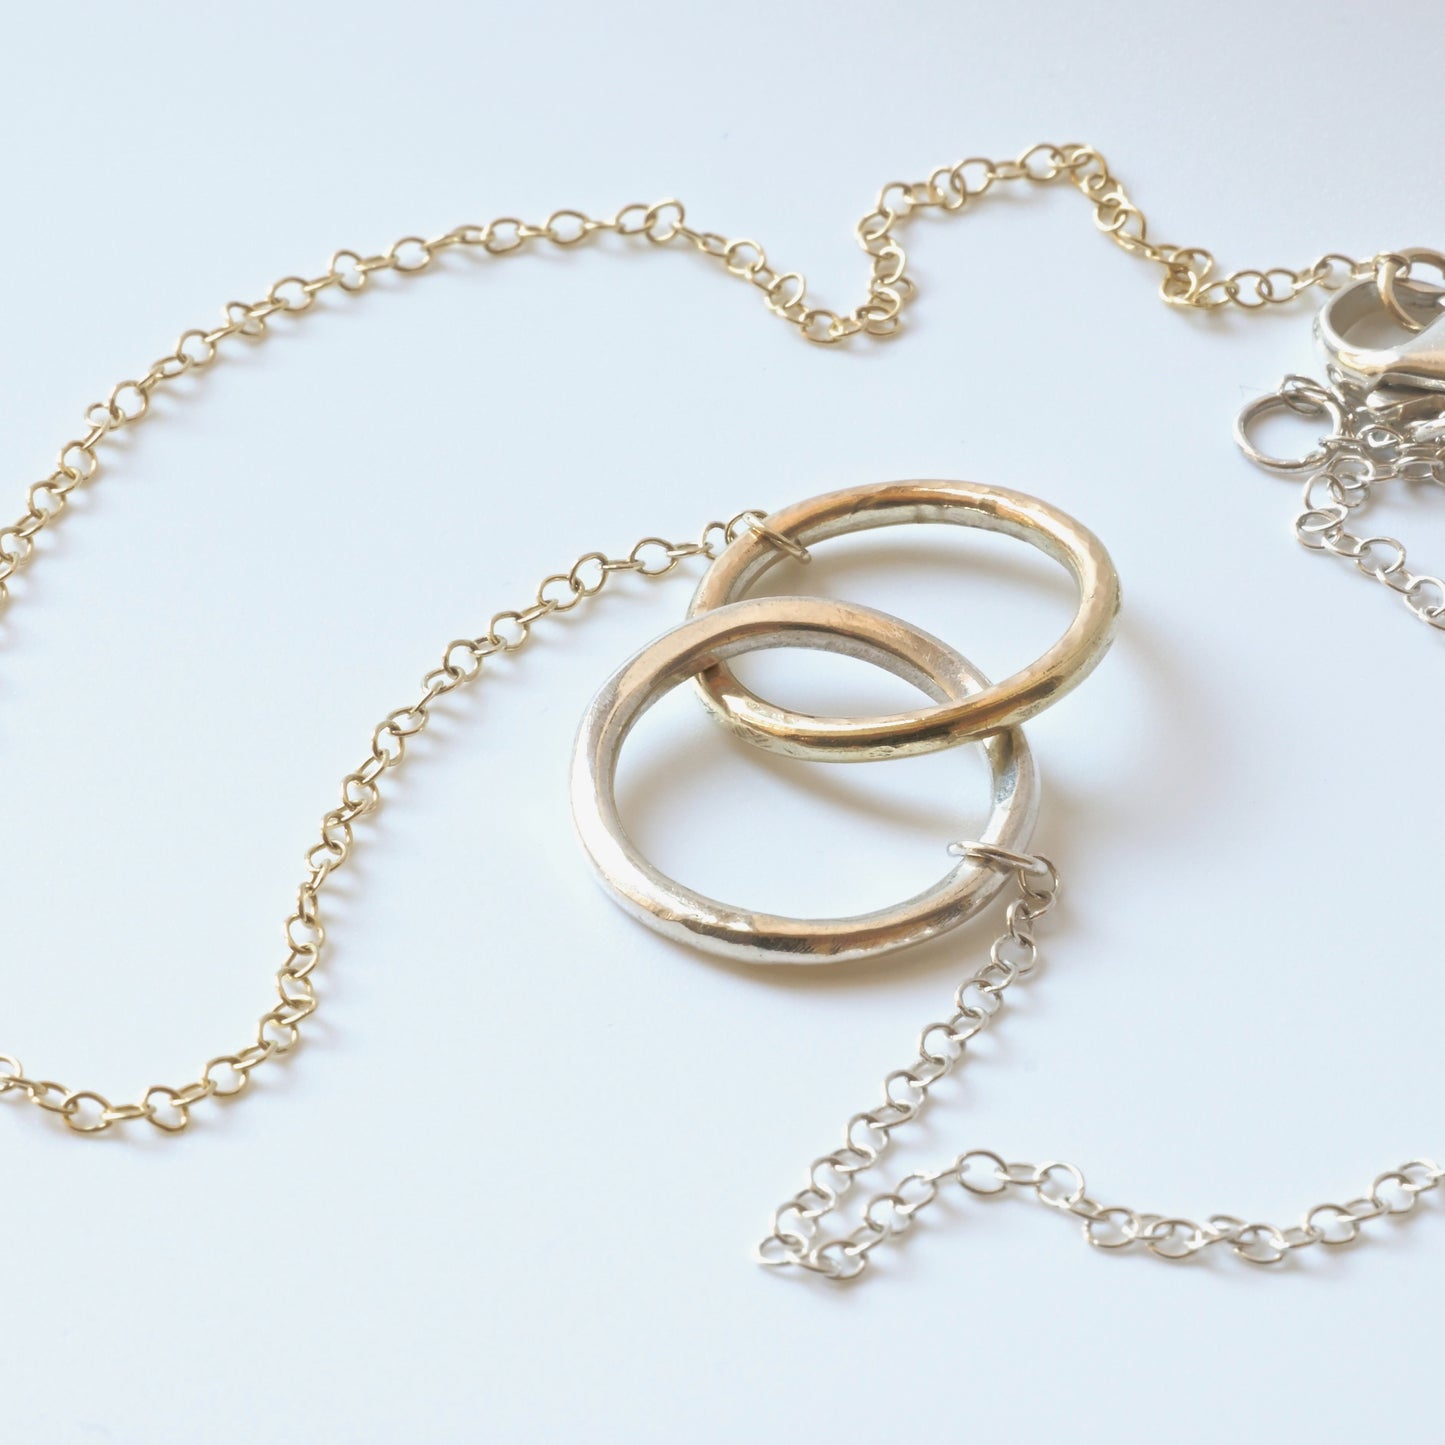 The Gold & Silver Circle Link Necklace